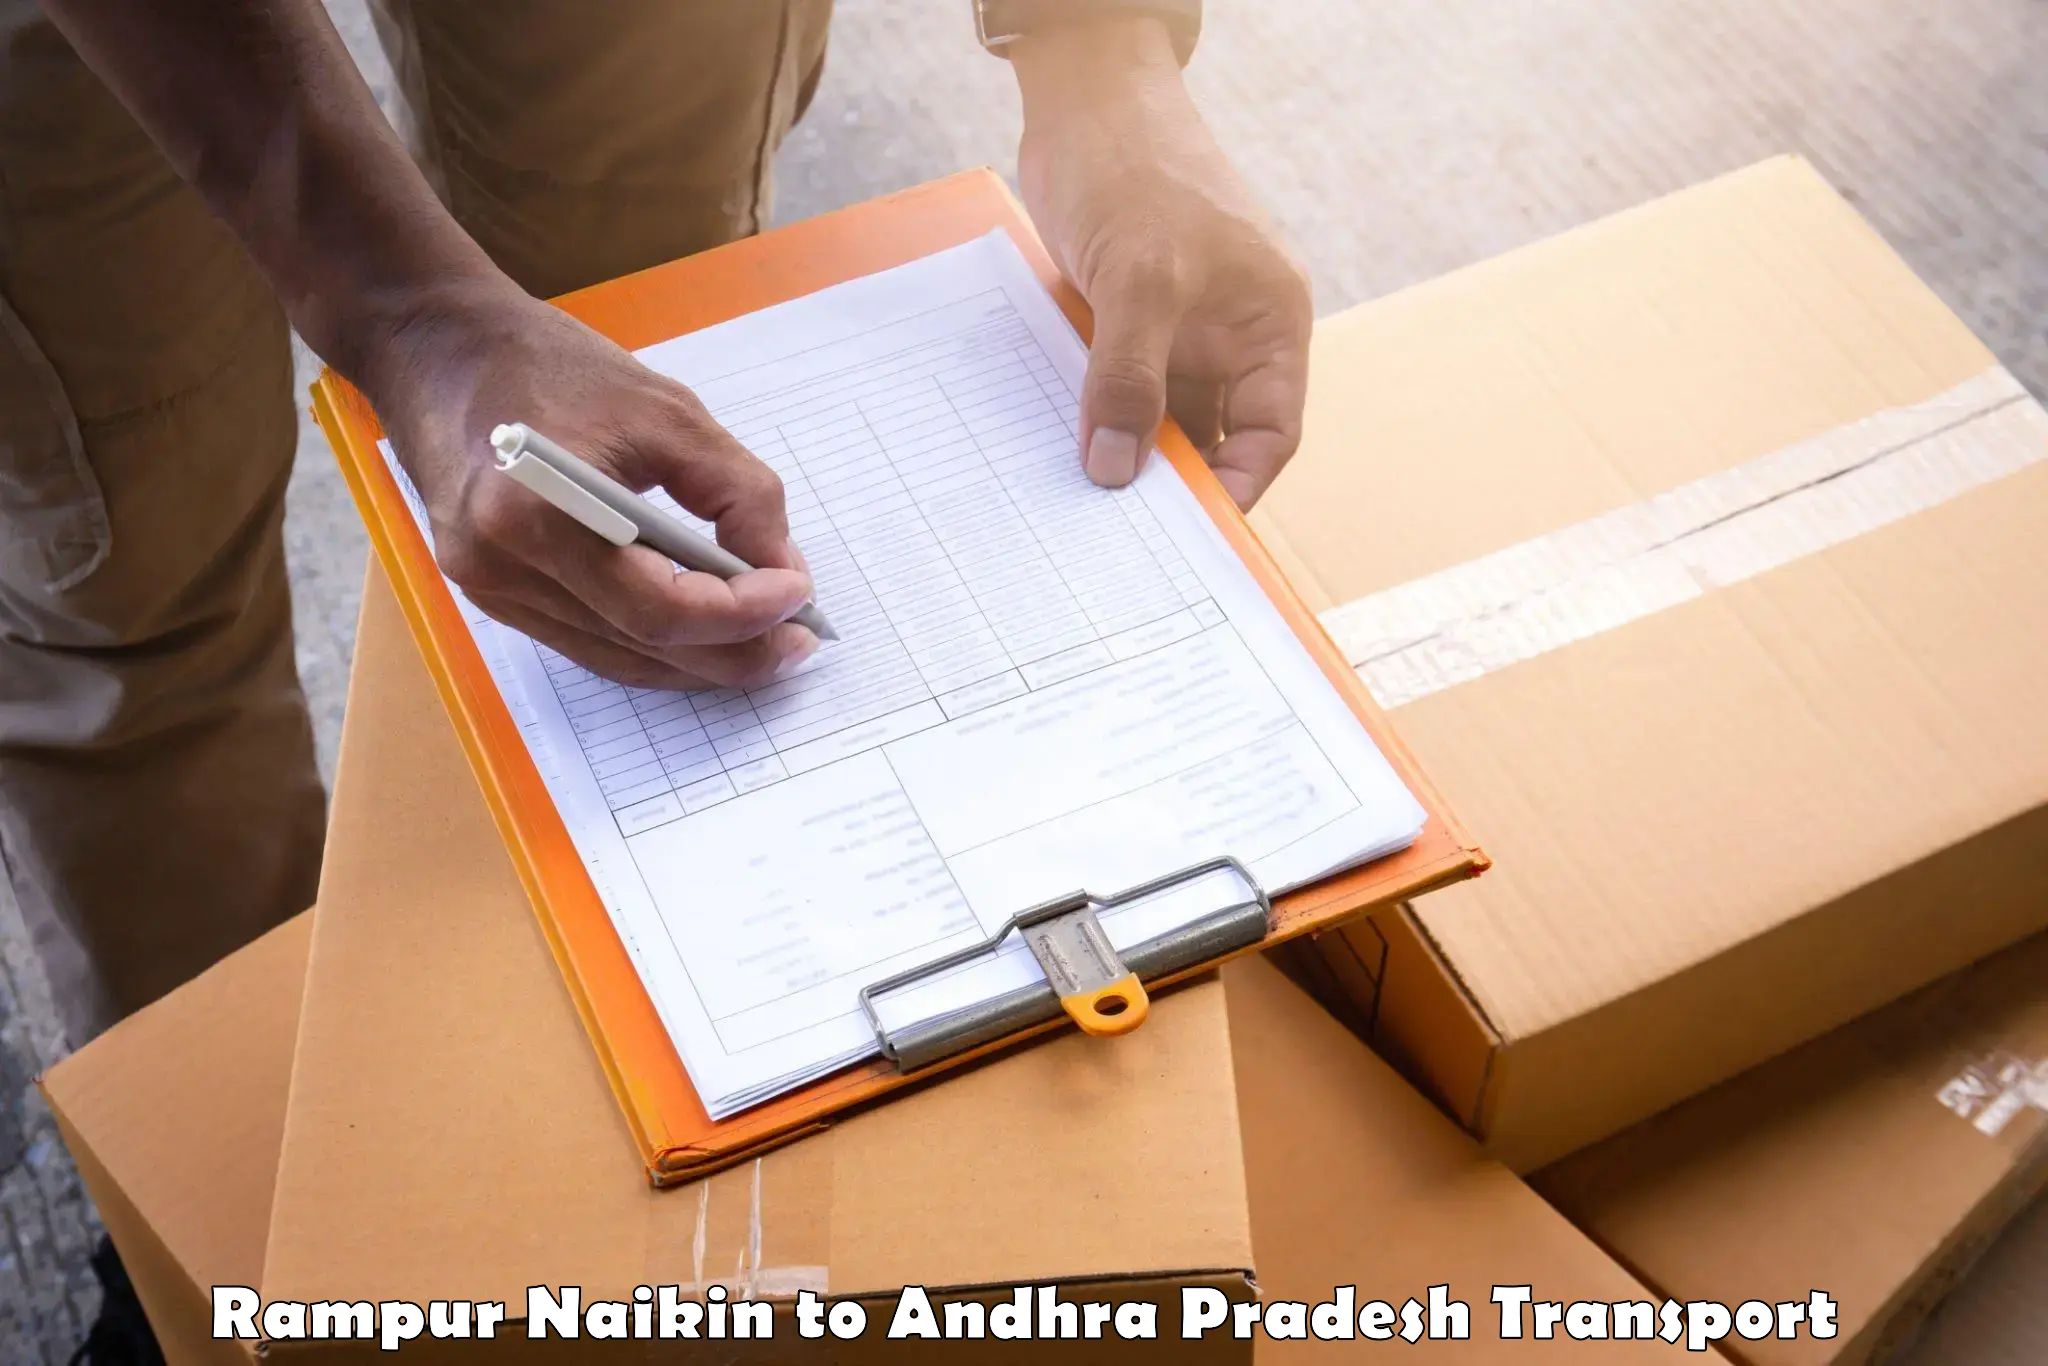 Delivery service in Rampur Naikin to Samalkot